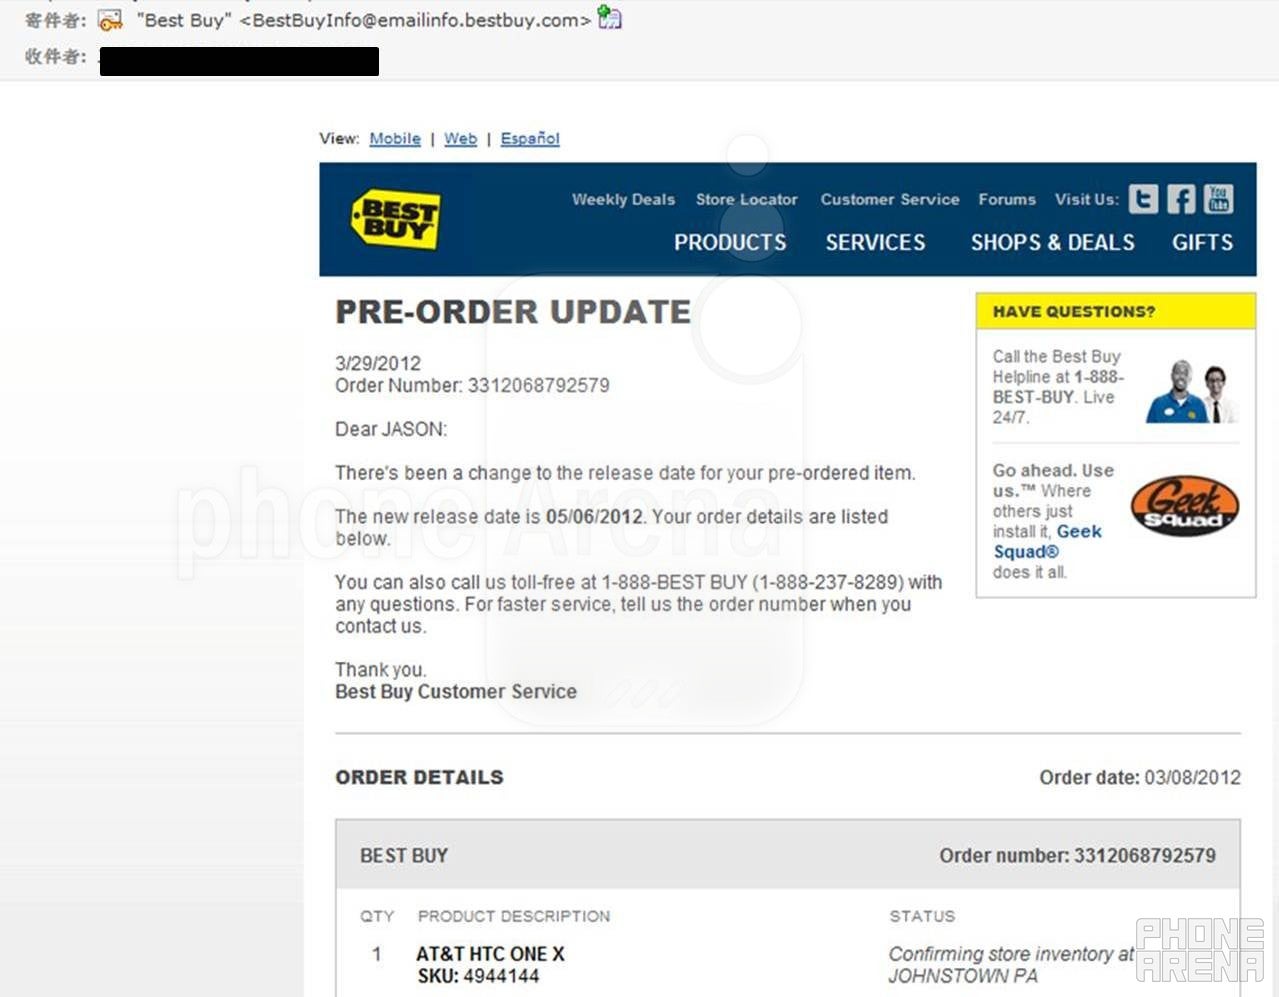 Best Buy tells customer in an email the HTC One X launch date is now May 6